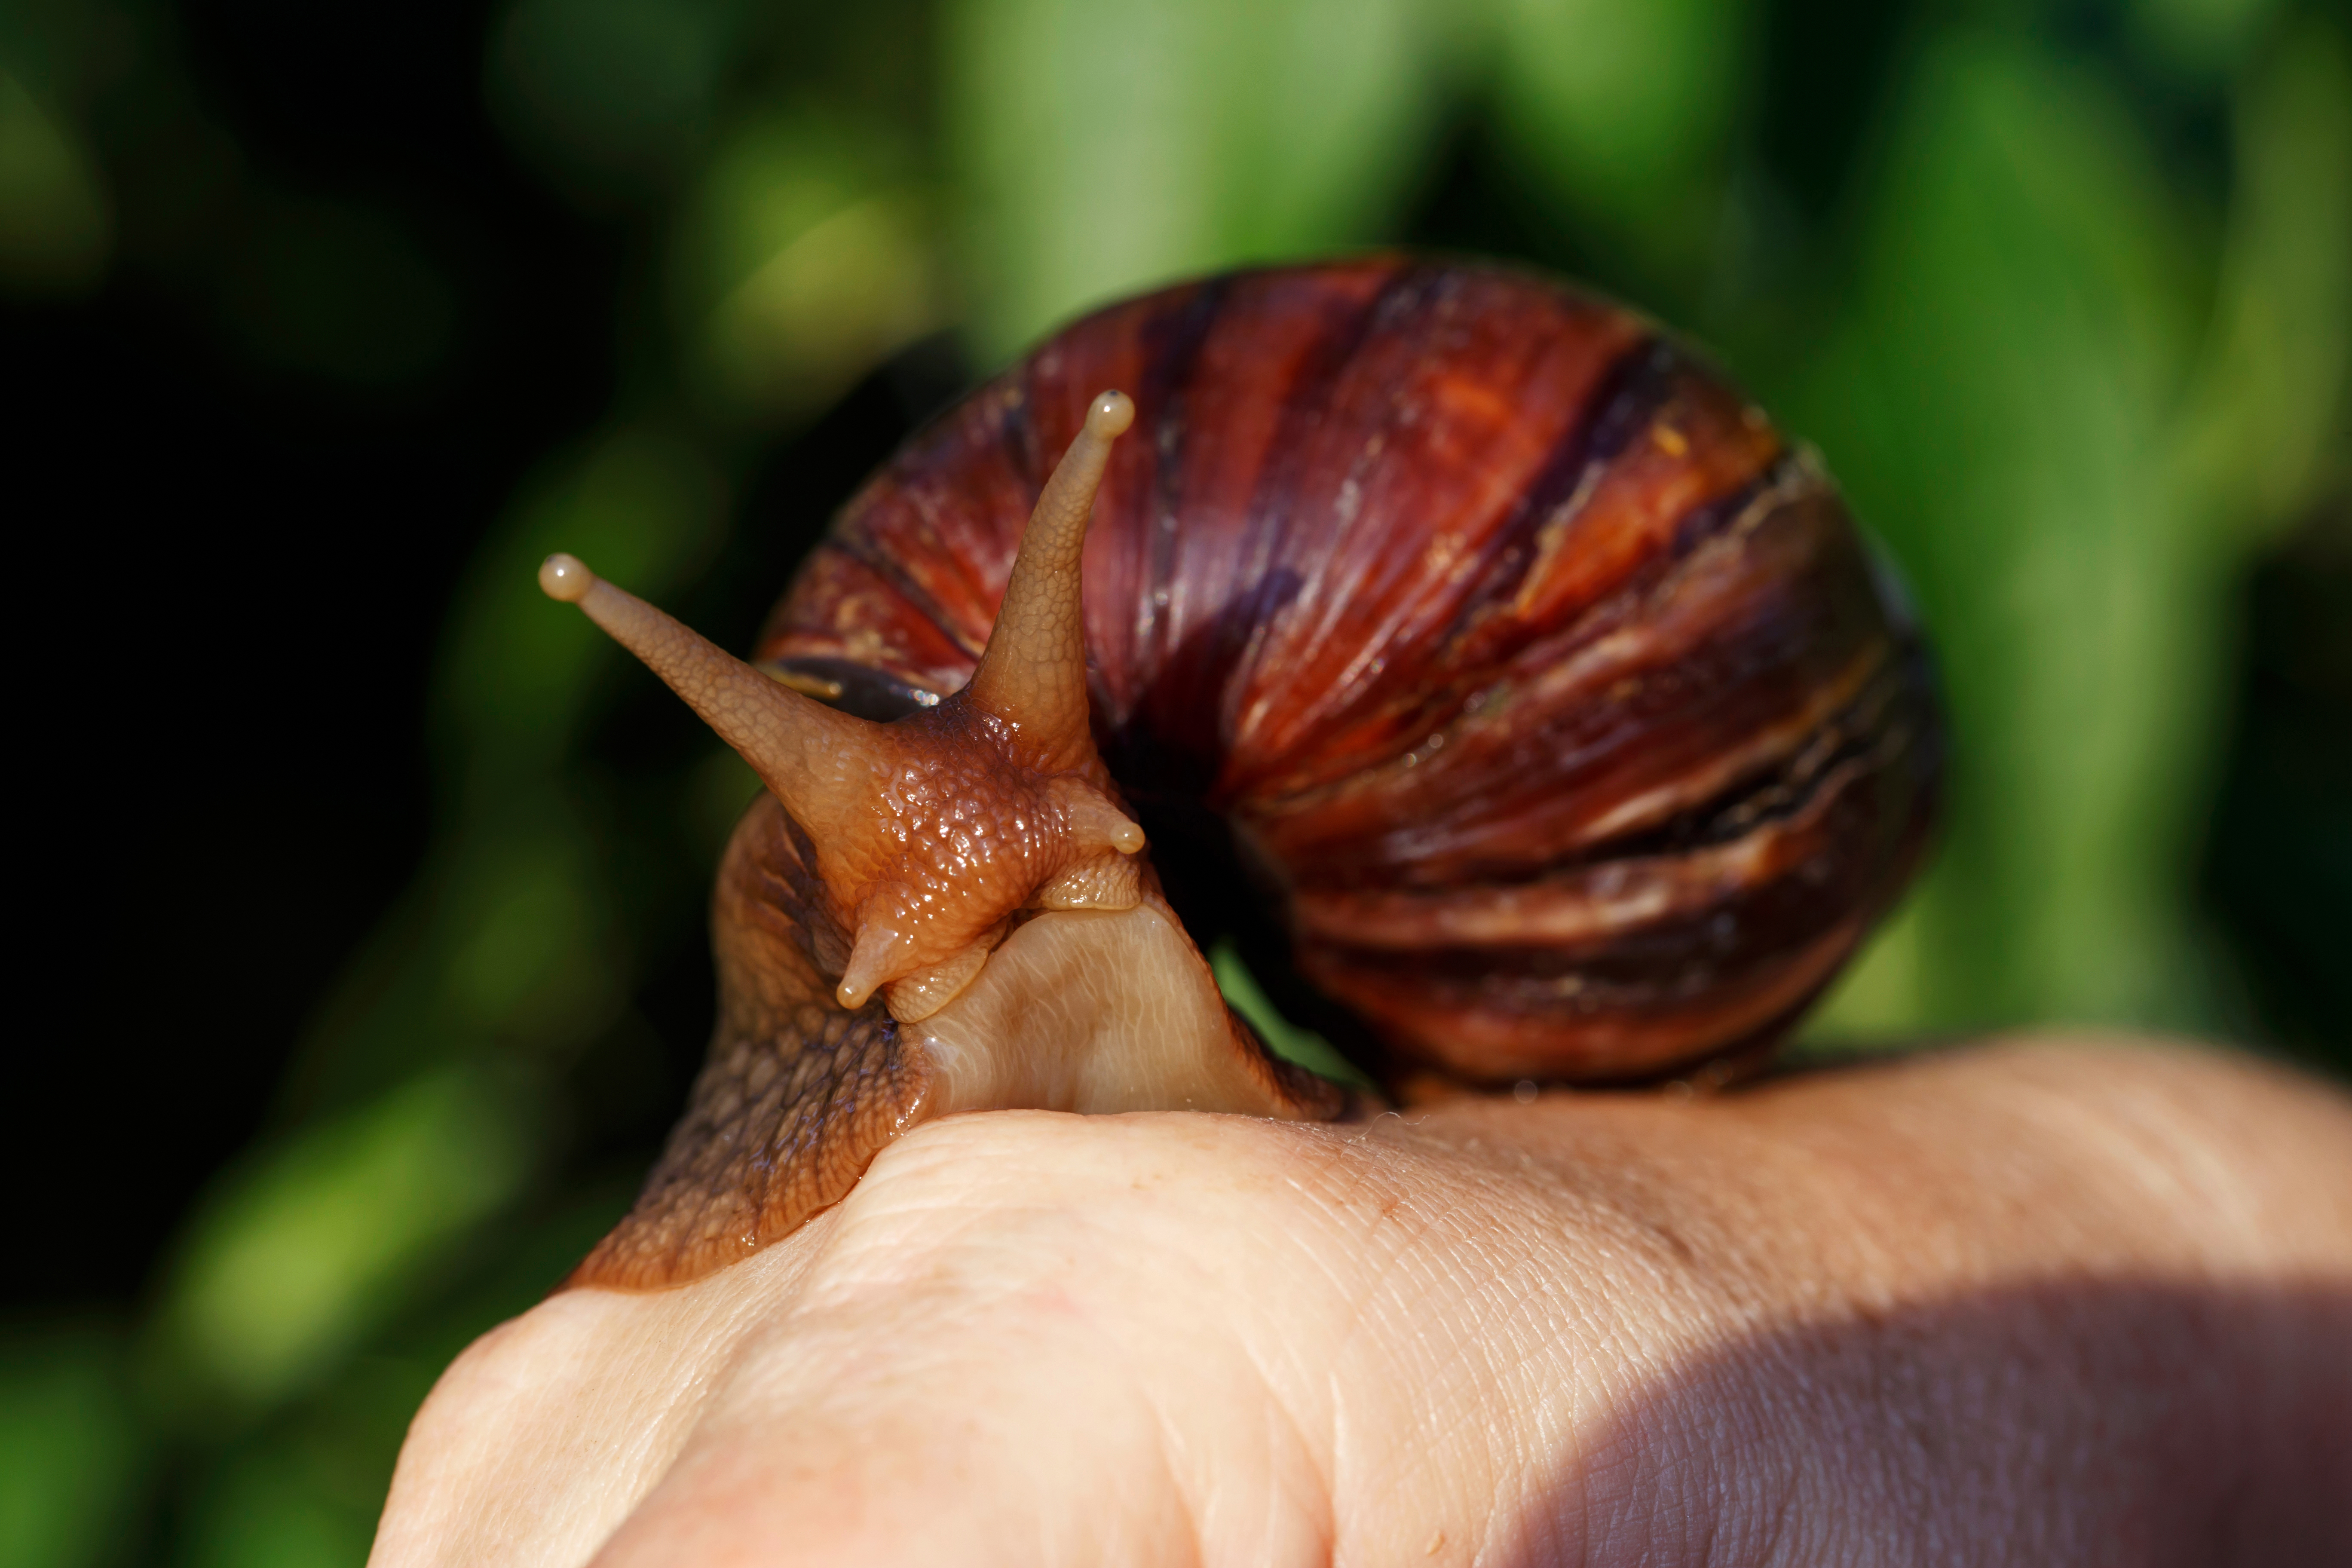 What temperature is good for land snails?